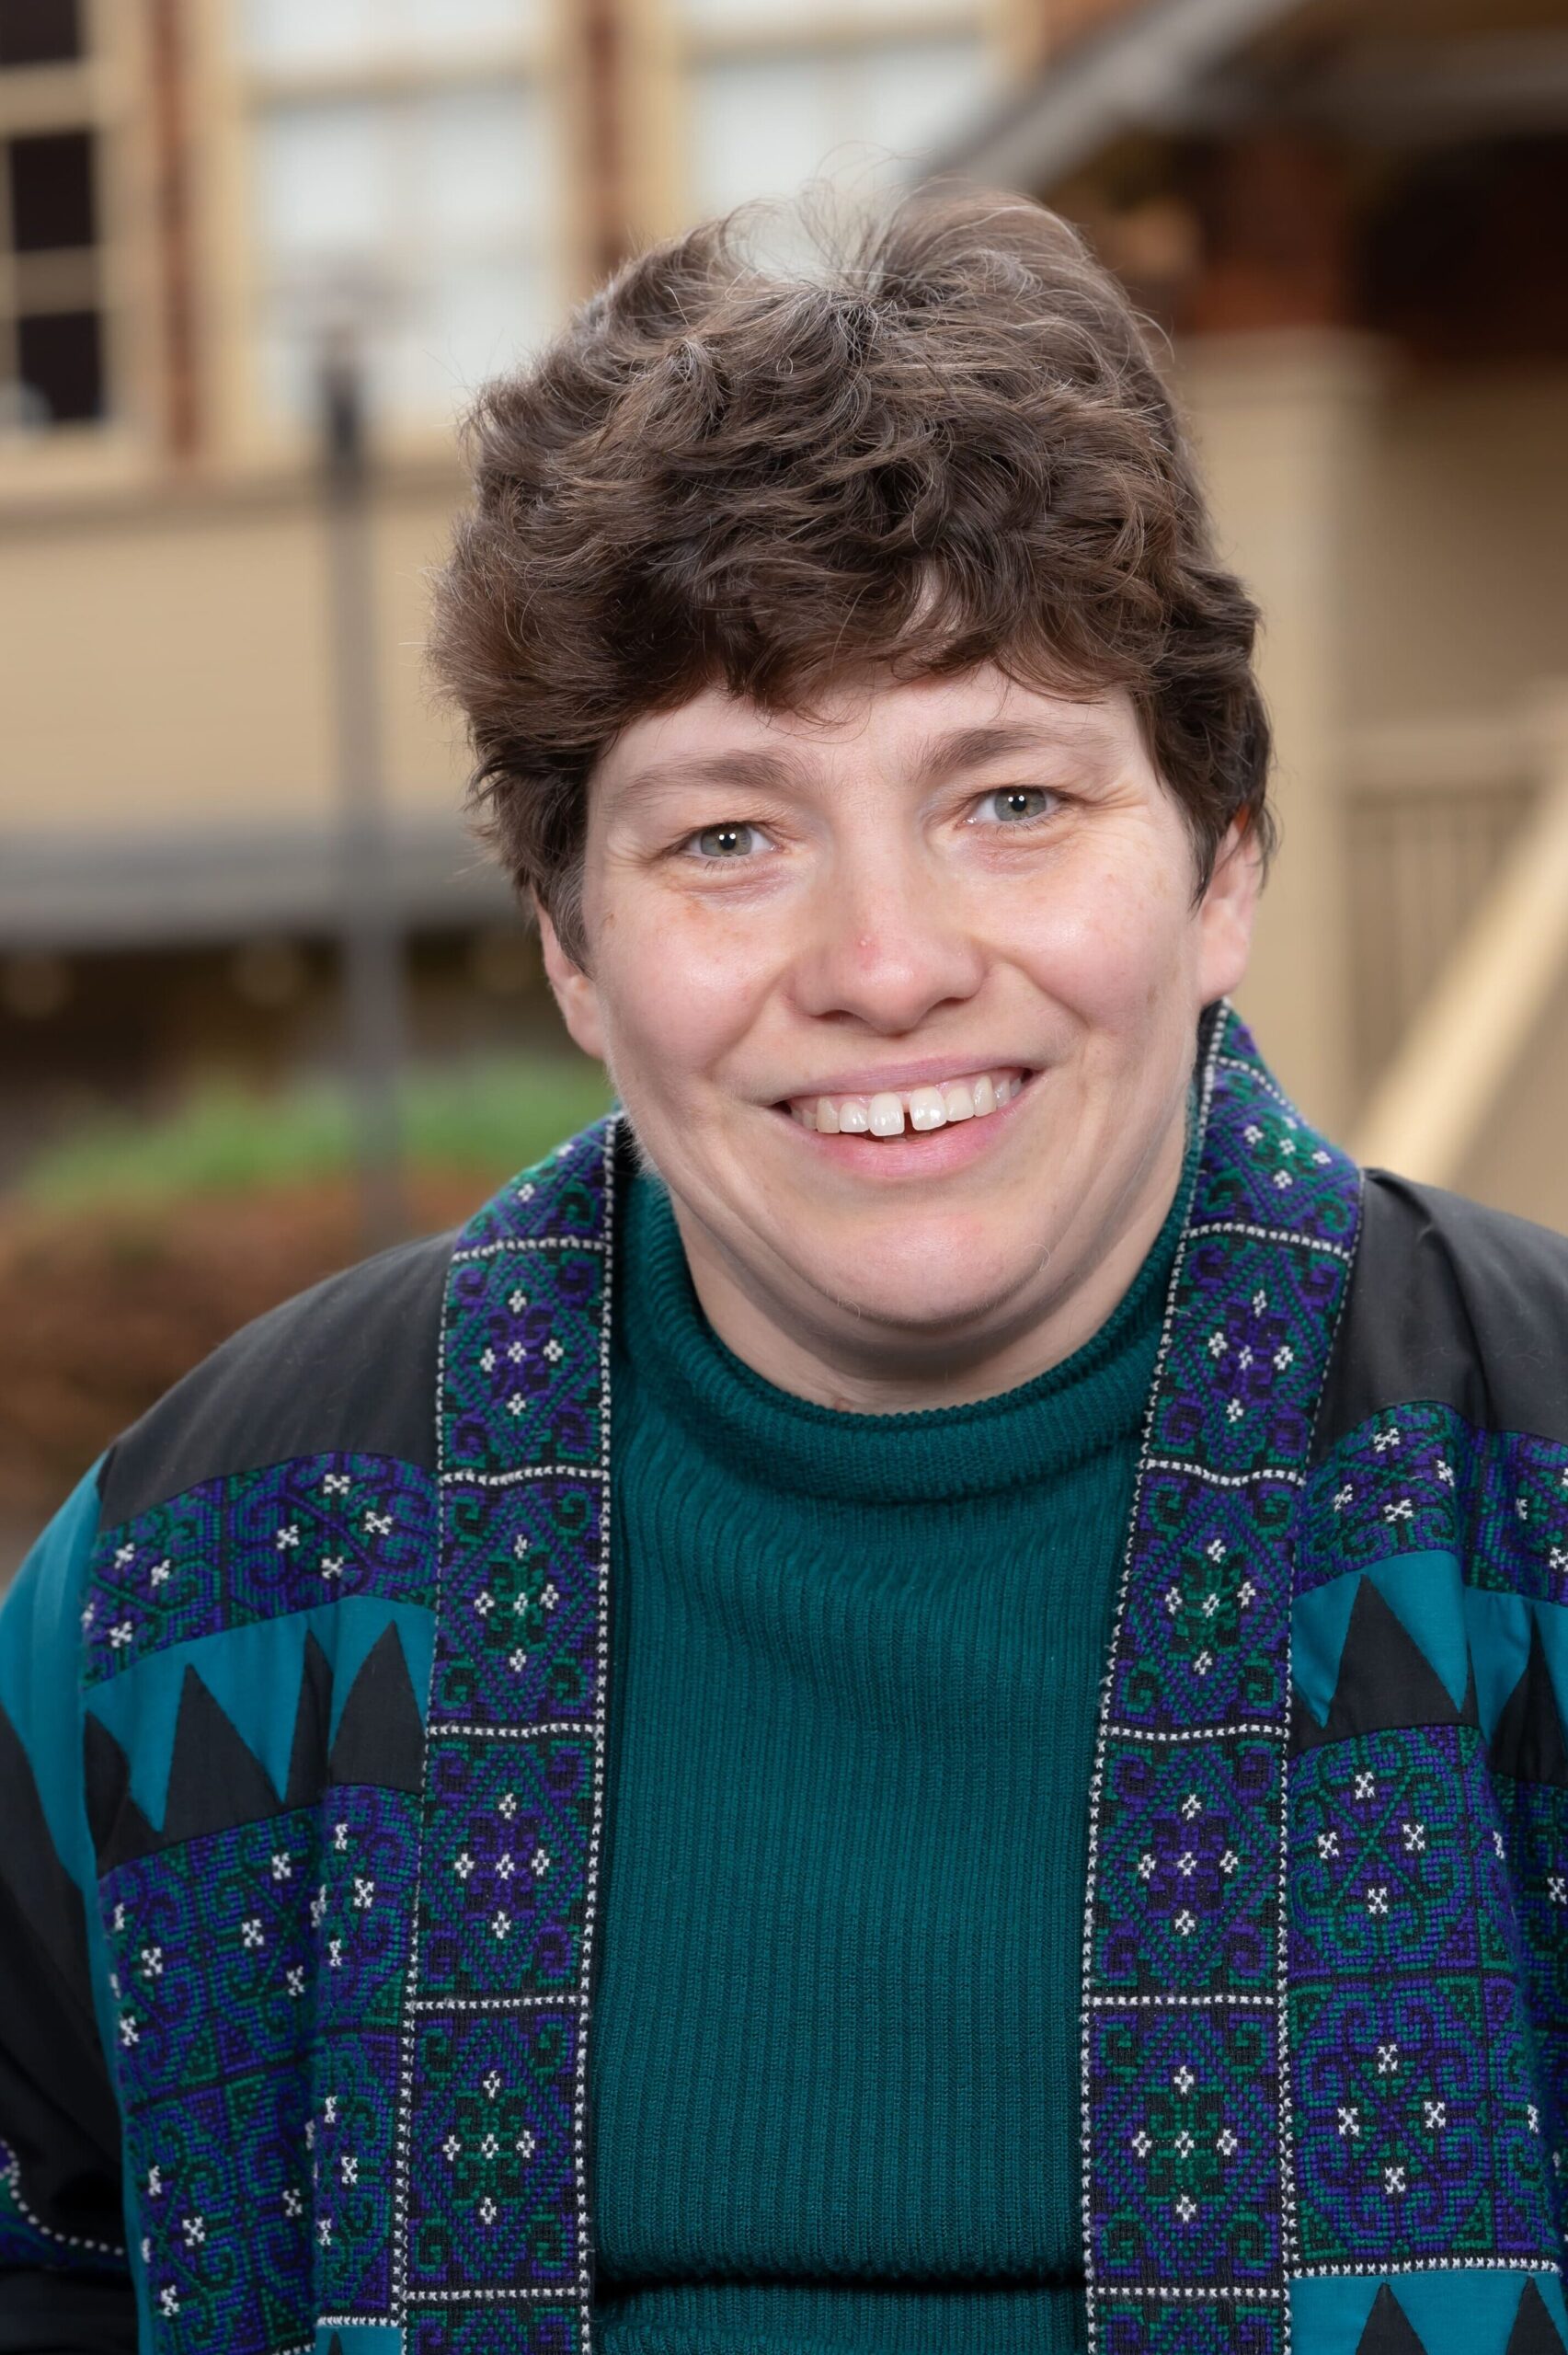 Sophia DeWitt smiles at the camera. She is a white woman with short cropped, wavy hair. She is wearing a teal turtleneck and a patterned blue cardigan.